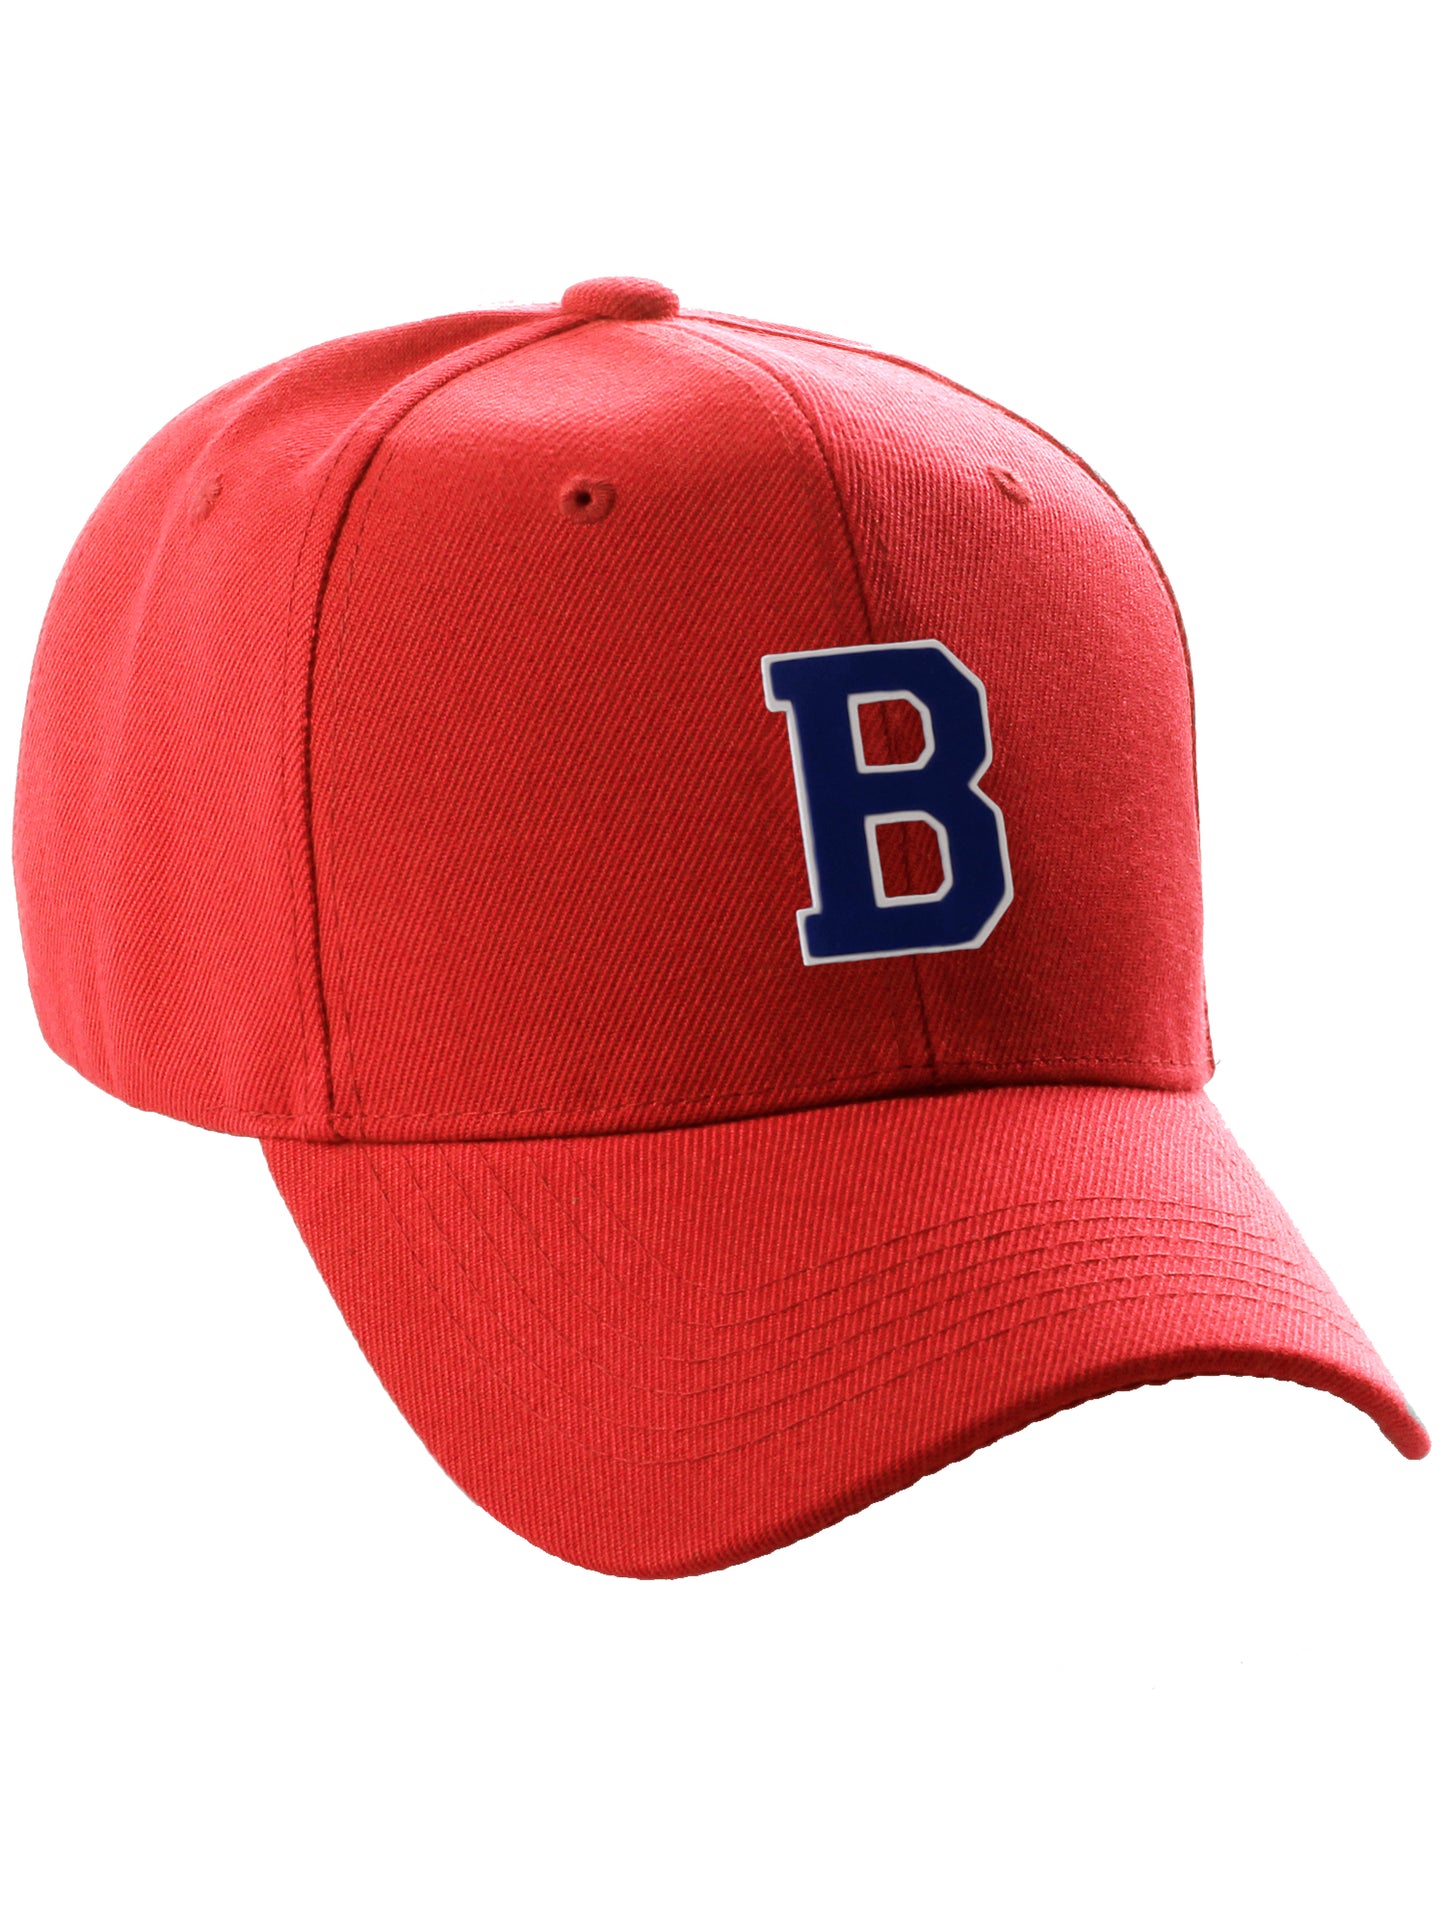 Classic Baseball Hat Custom A to Z Initial Team Letter, Red Cap White Navy